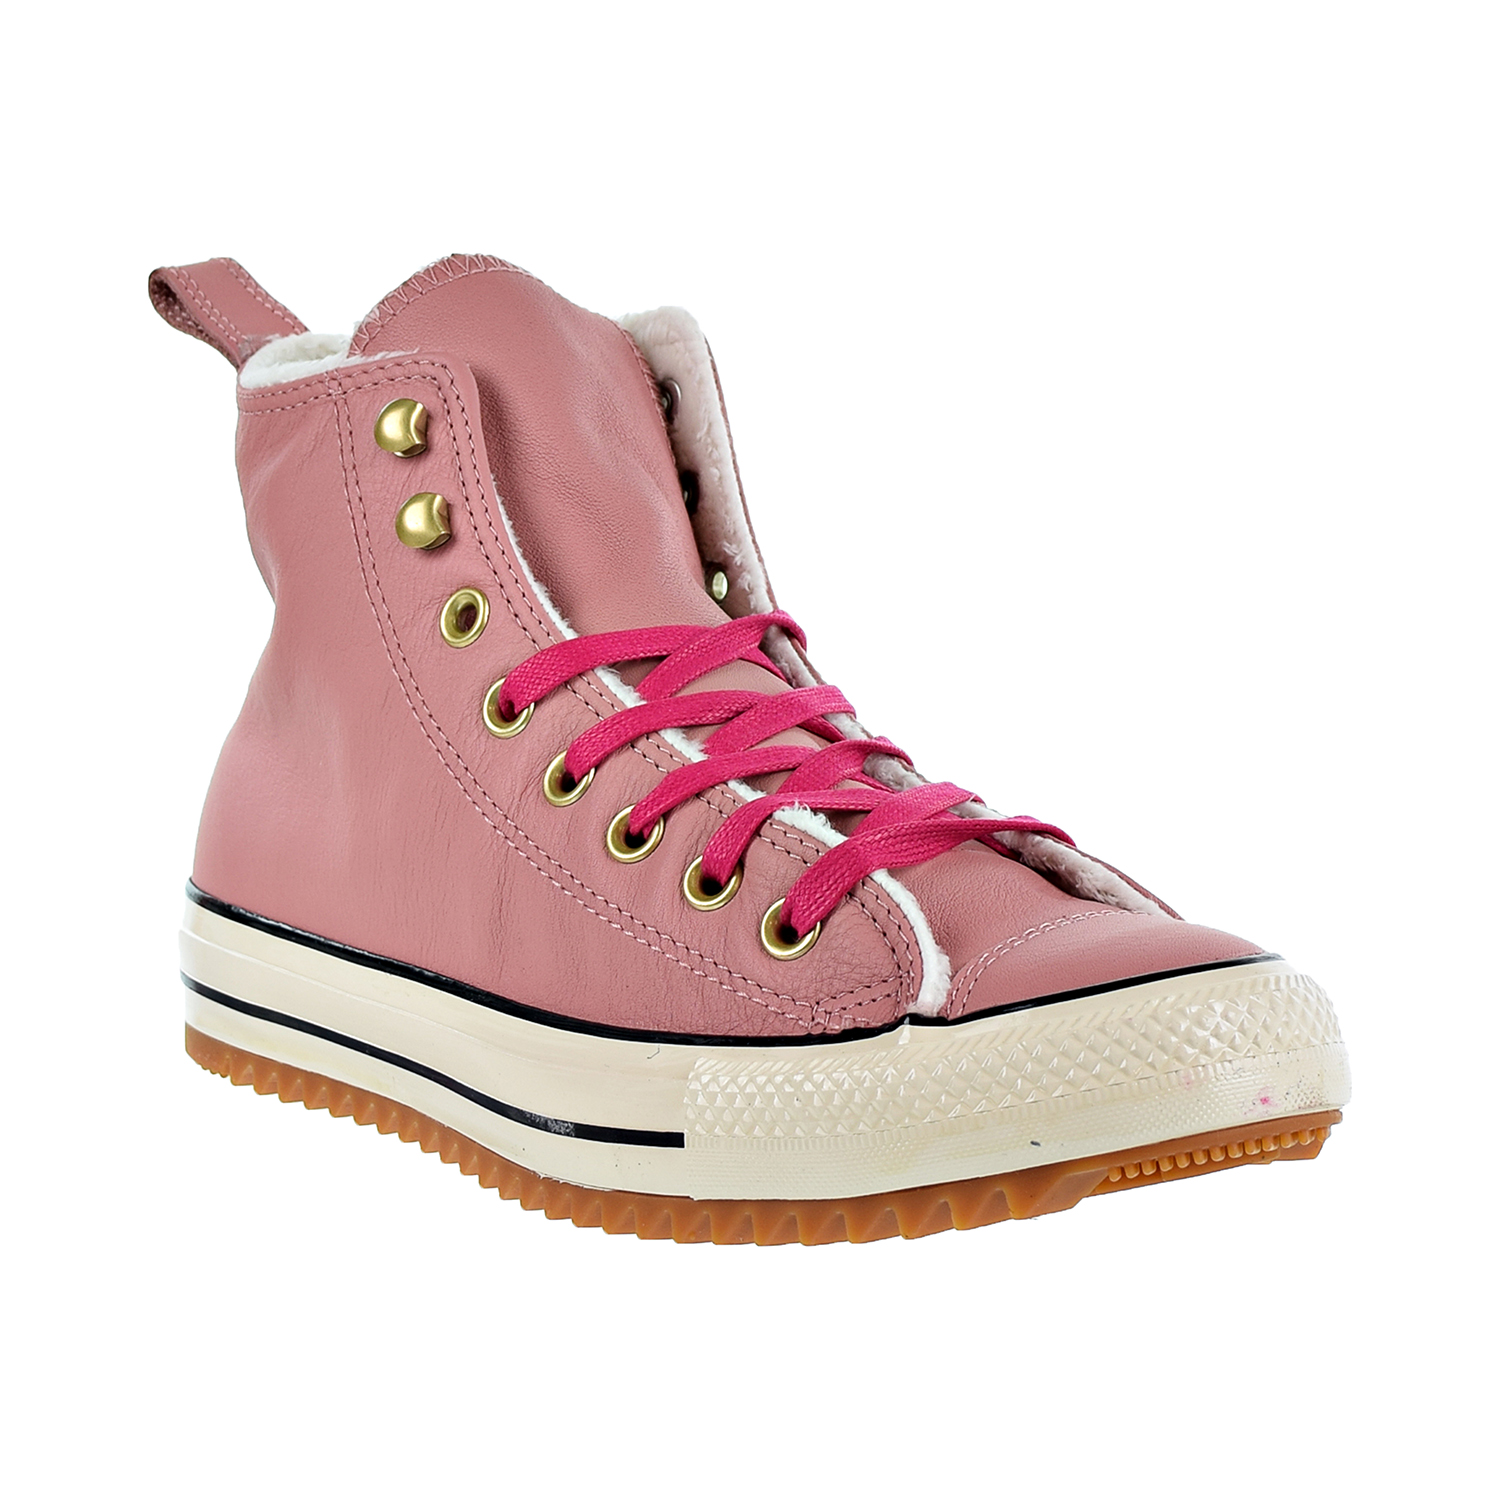 Converse Chuck Taylor All Star Hiker Boot Hi Unisex Sneakers Rust Pink-Pink Pop 162477c - image 2 of 6